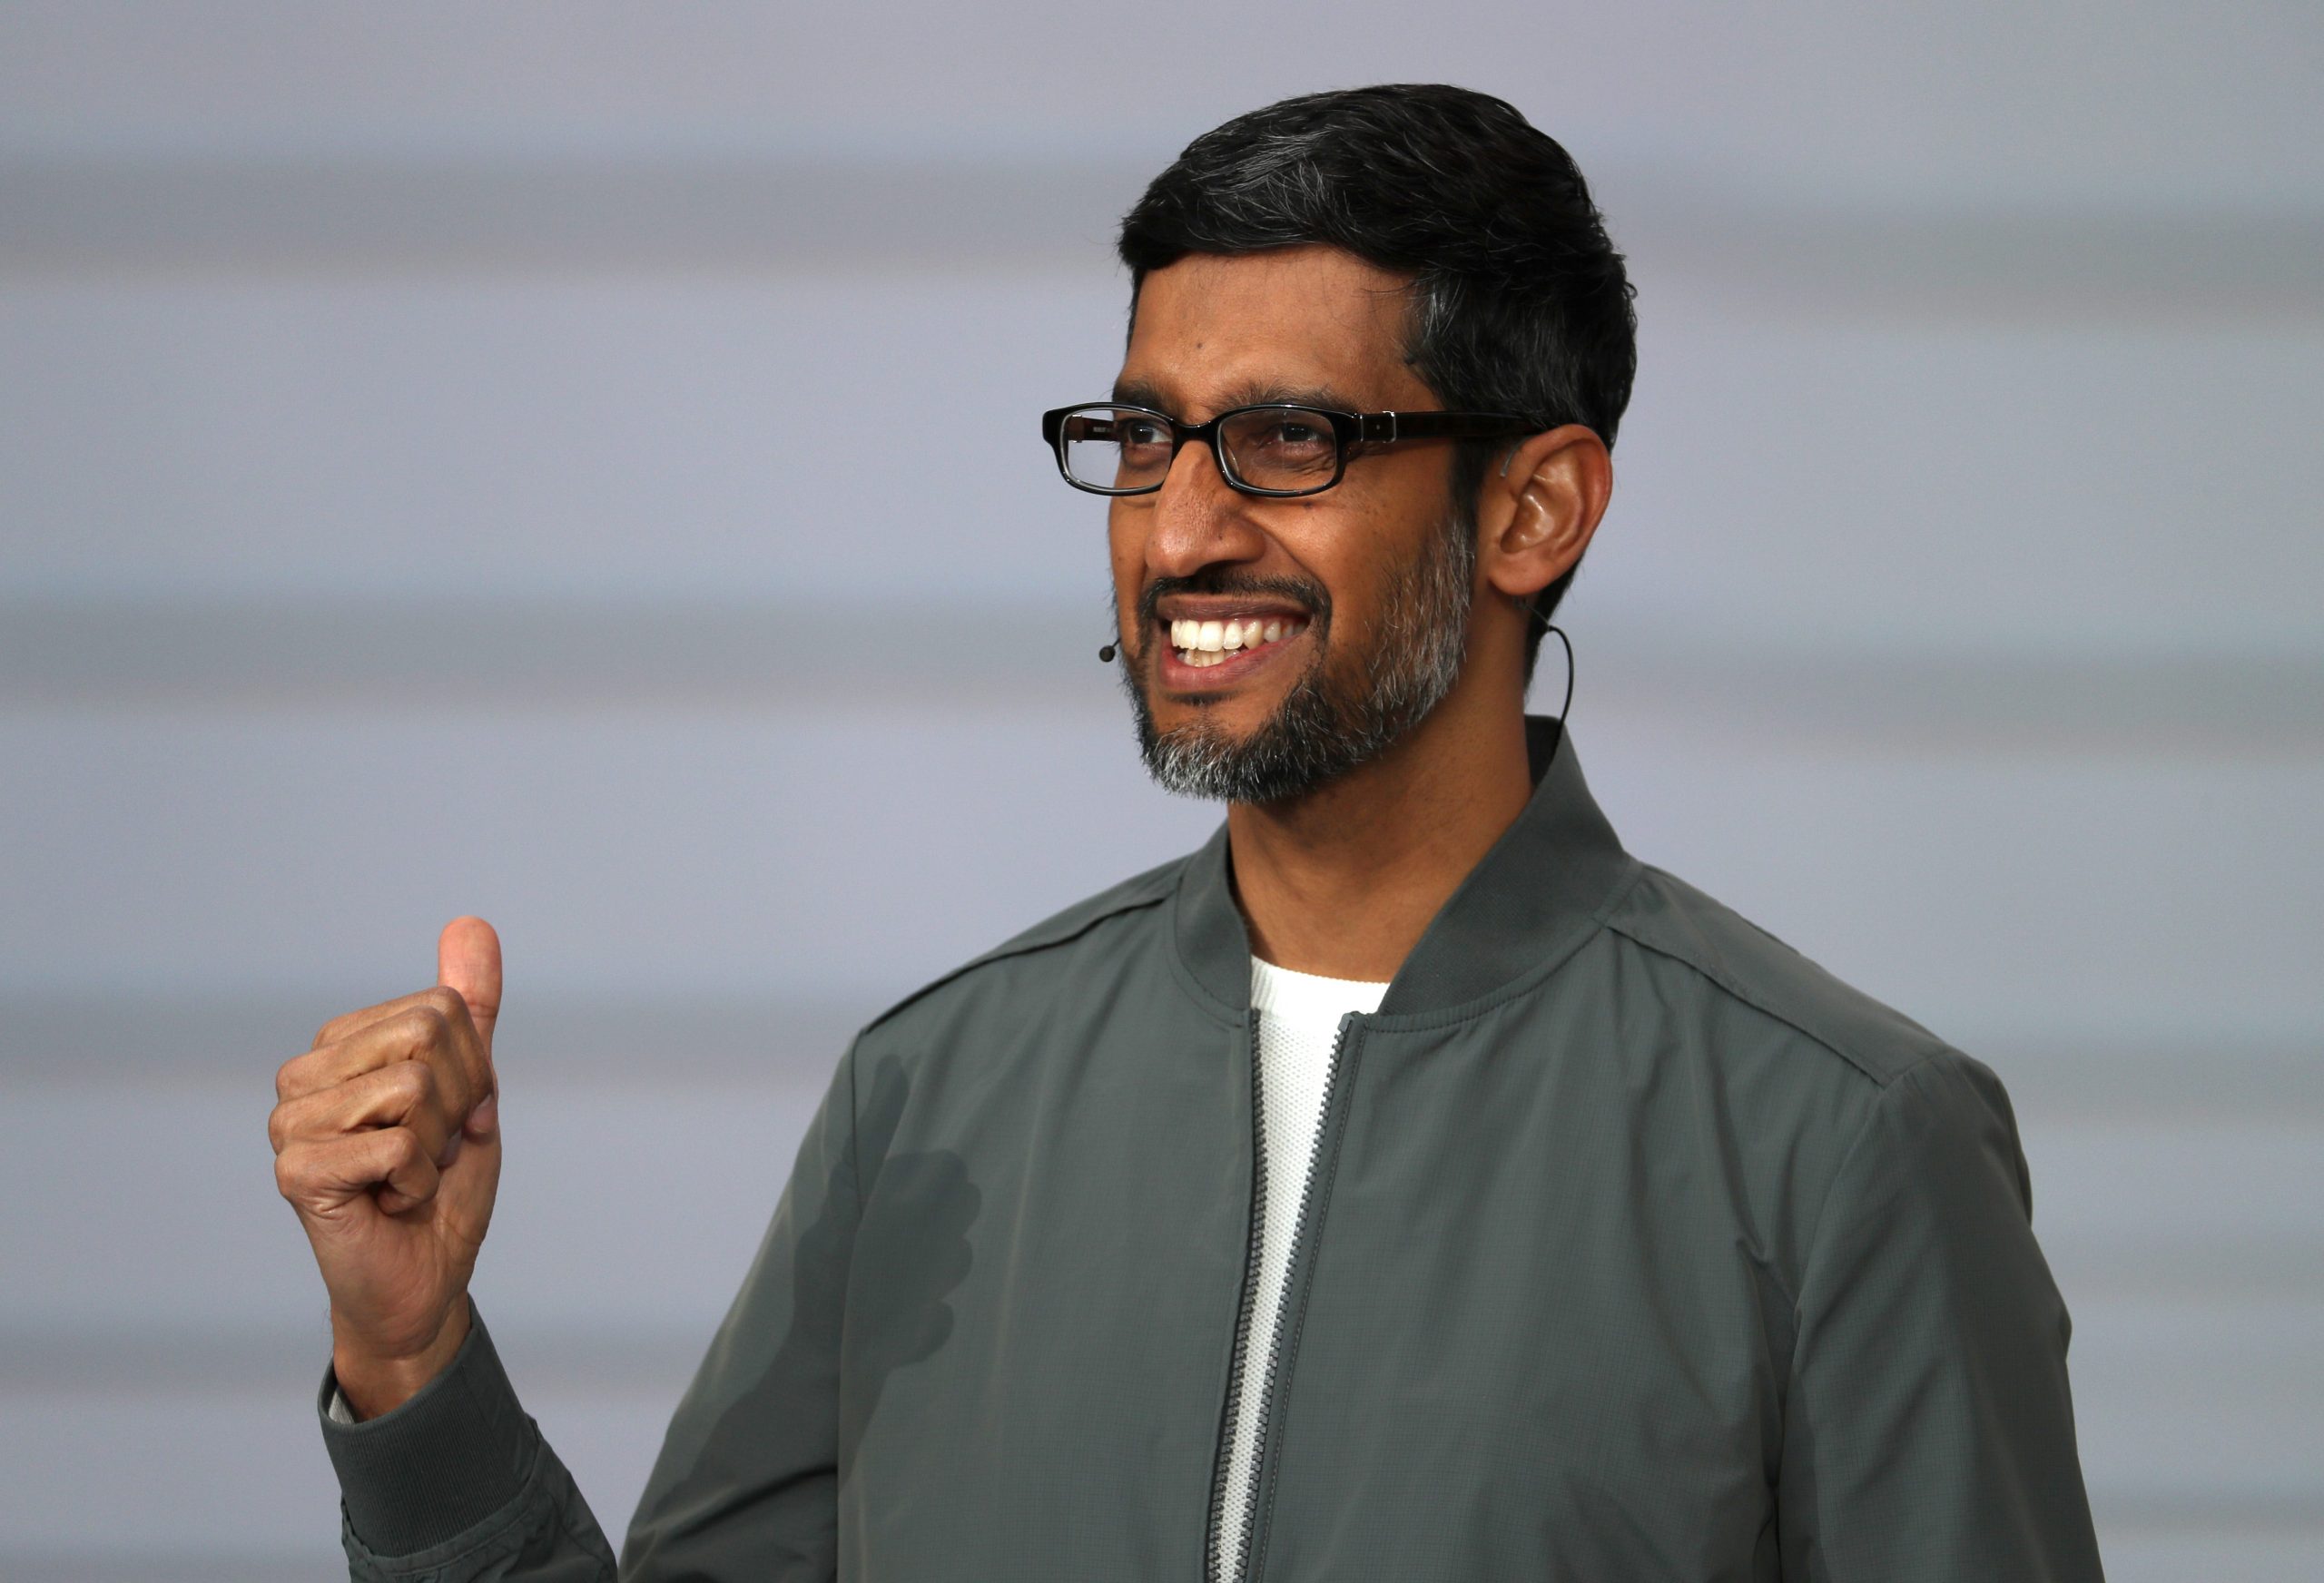 GettyImages Google CEO Sundar Pichai delivers the keynote address at the 2019 Google I/O conference at Shoreline Amphitheatre on May 07, 2019 in Mountain View, California.